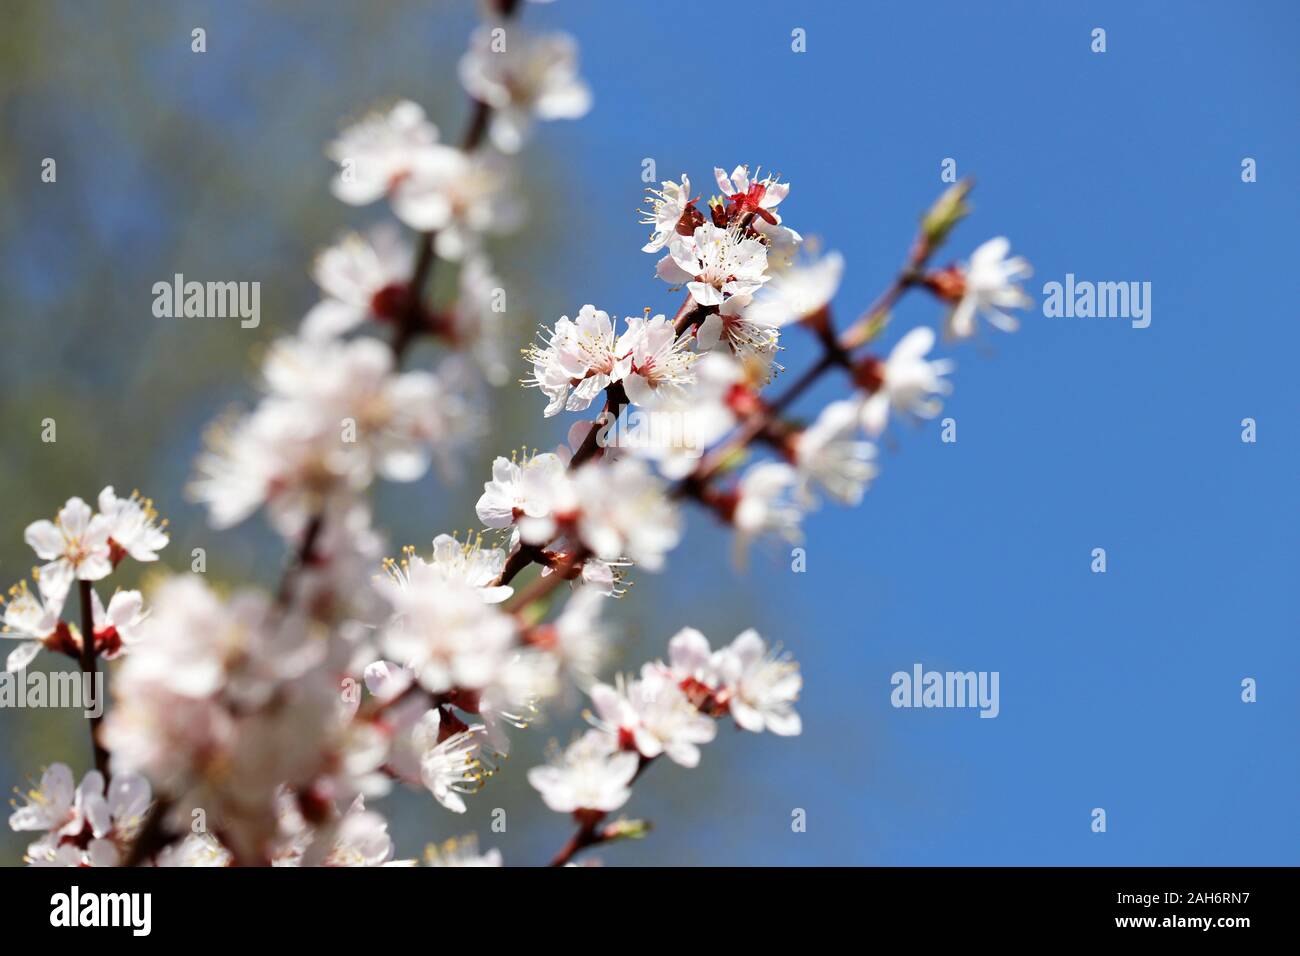 Cherry blossom in spring. Pink sakura flowers on a branch against the clear blue sky, romantic background Stock Photo